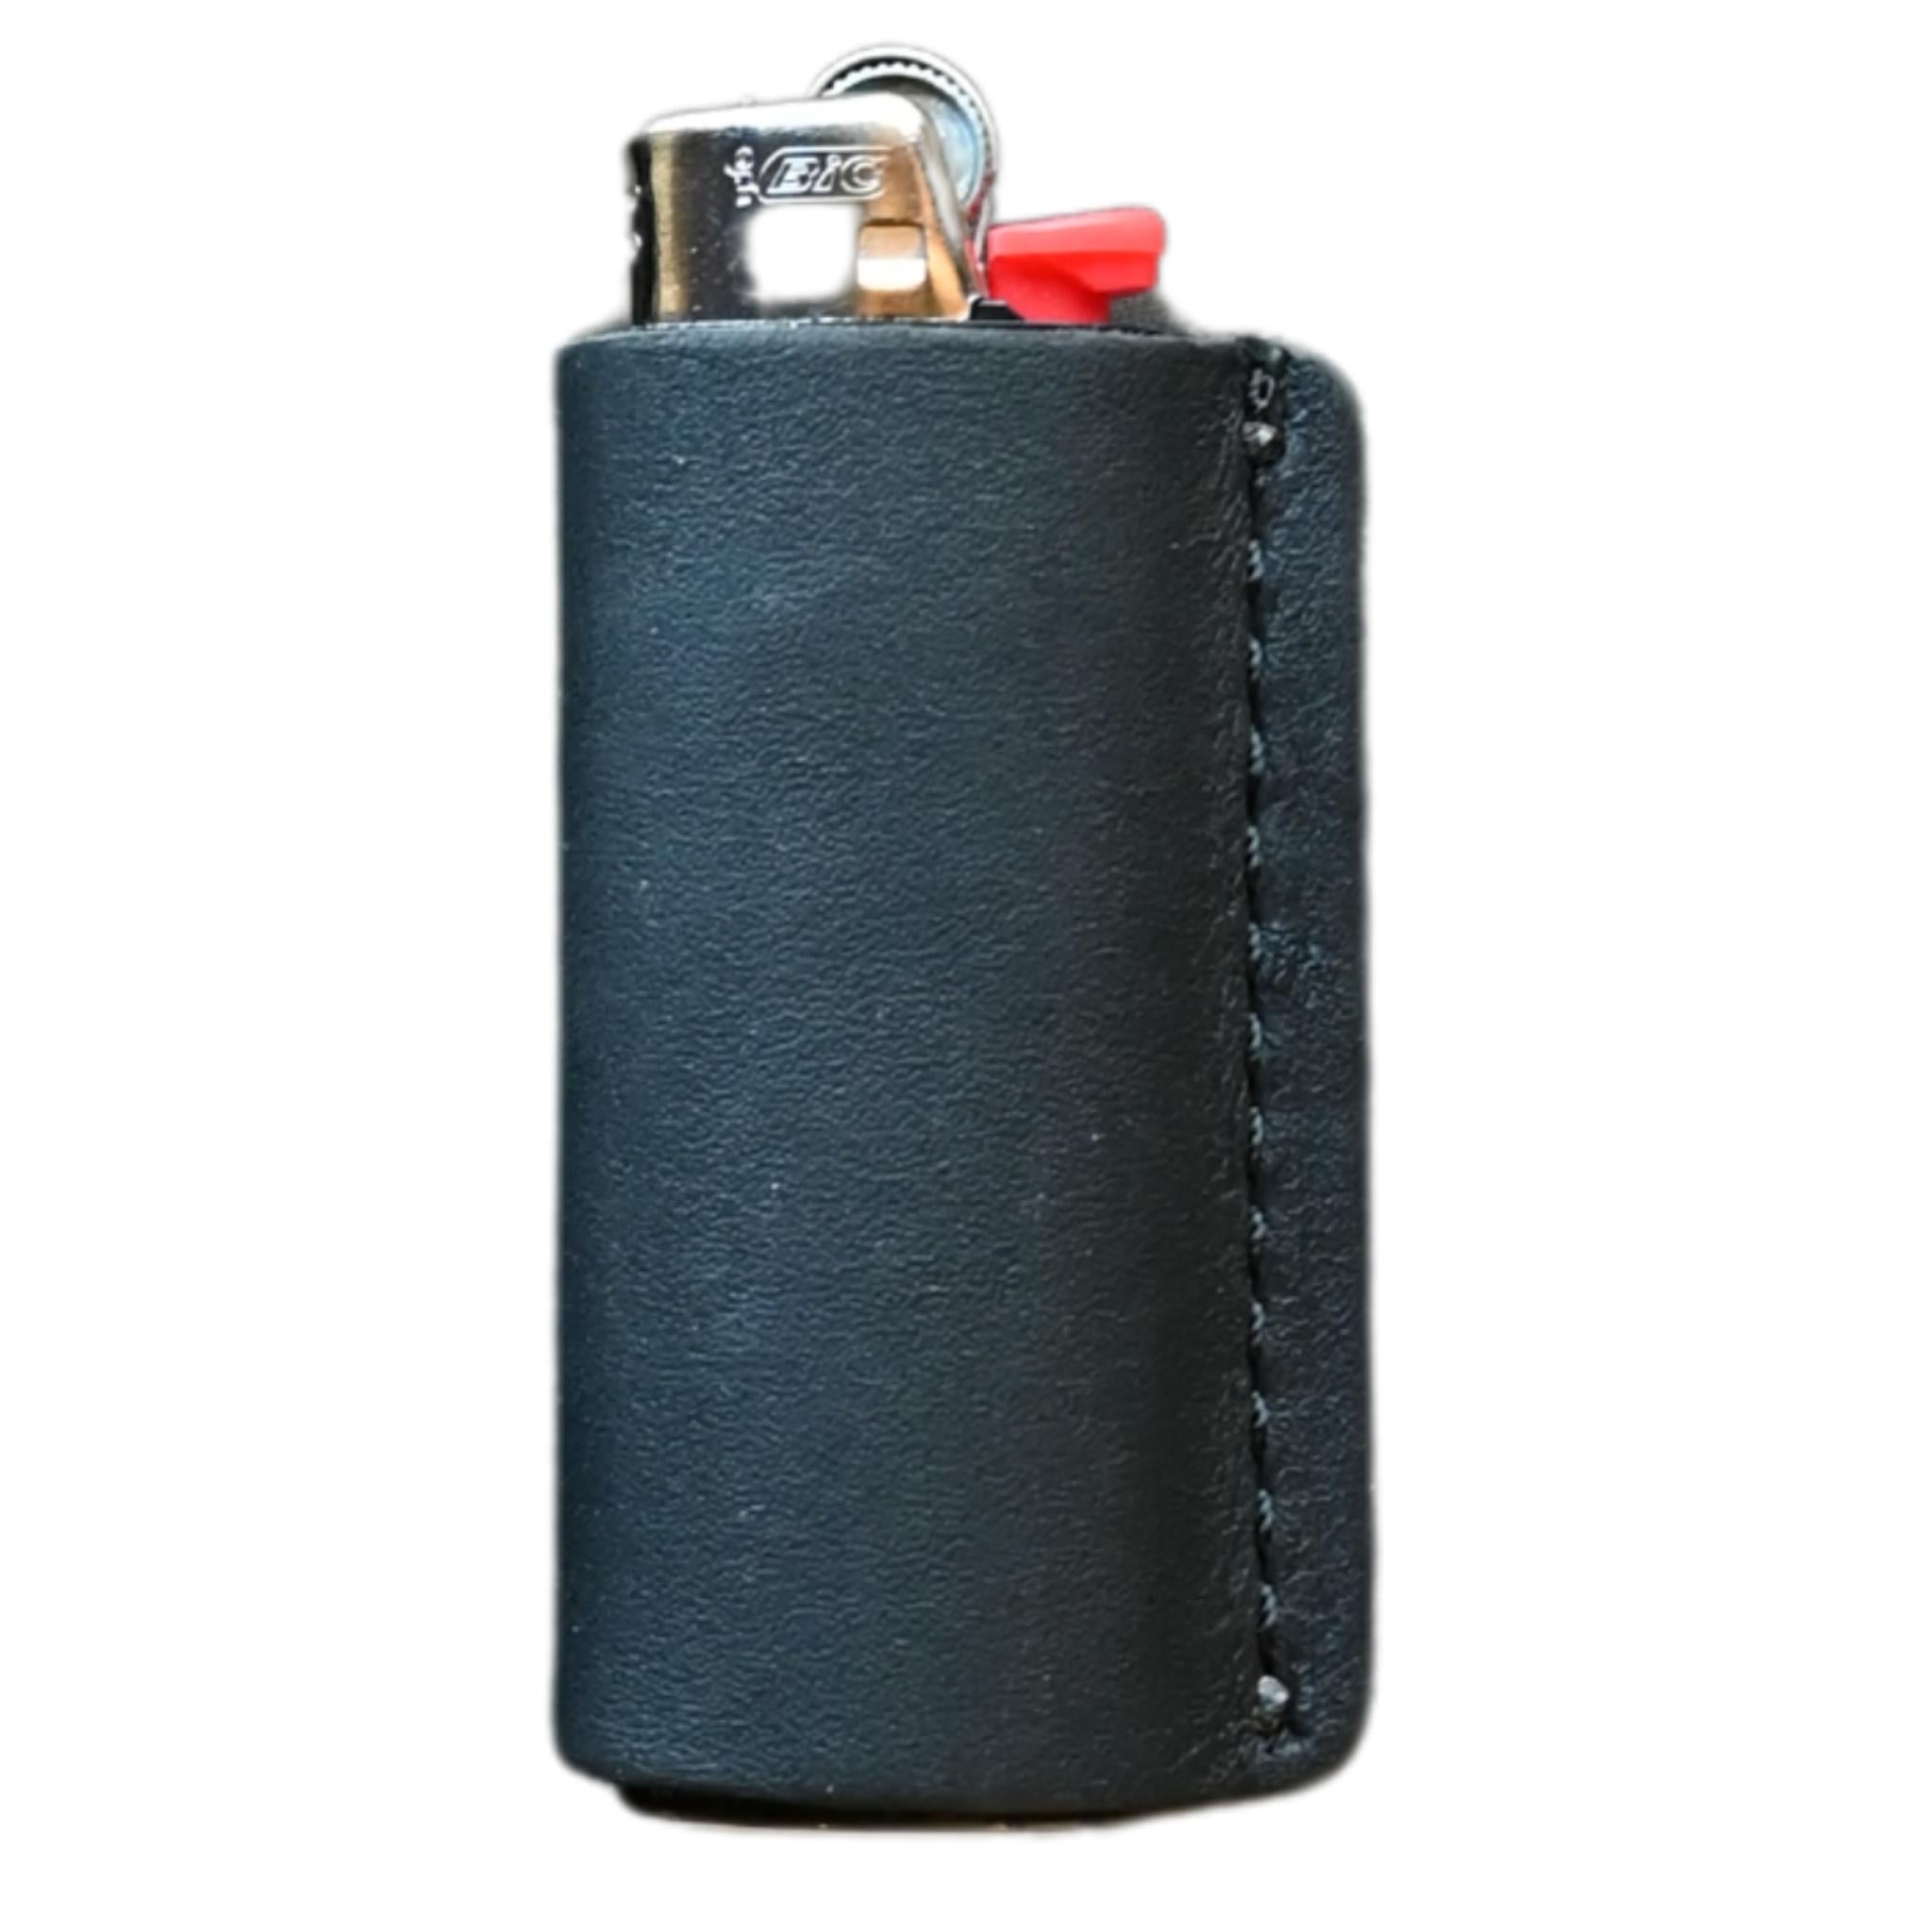 Bic Leather Lighter Sleeve